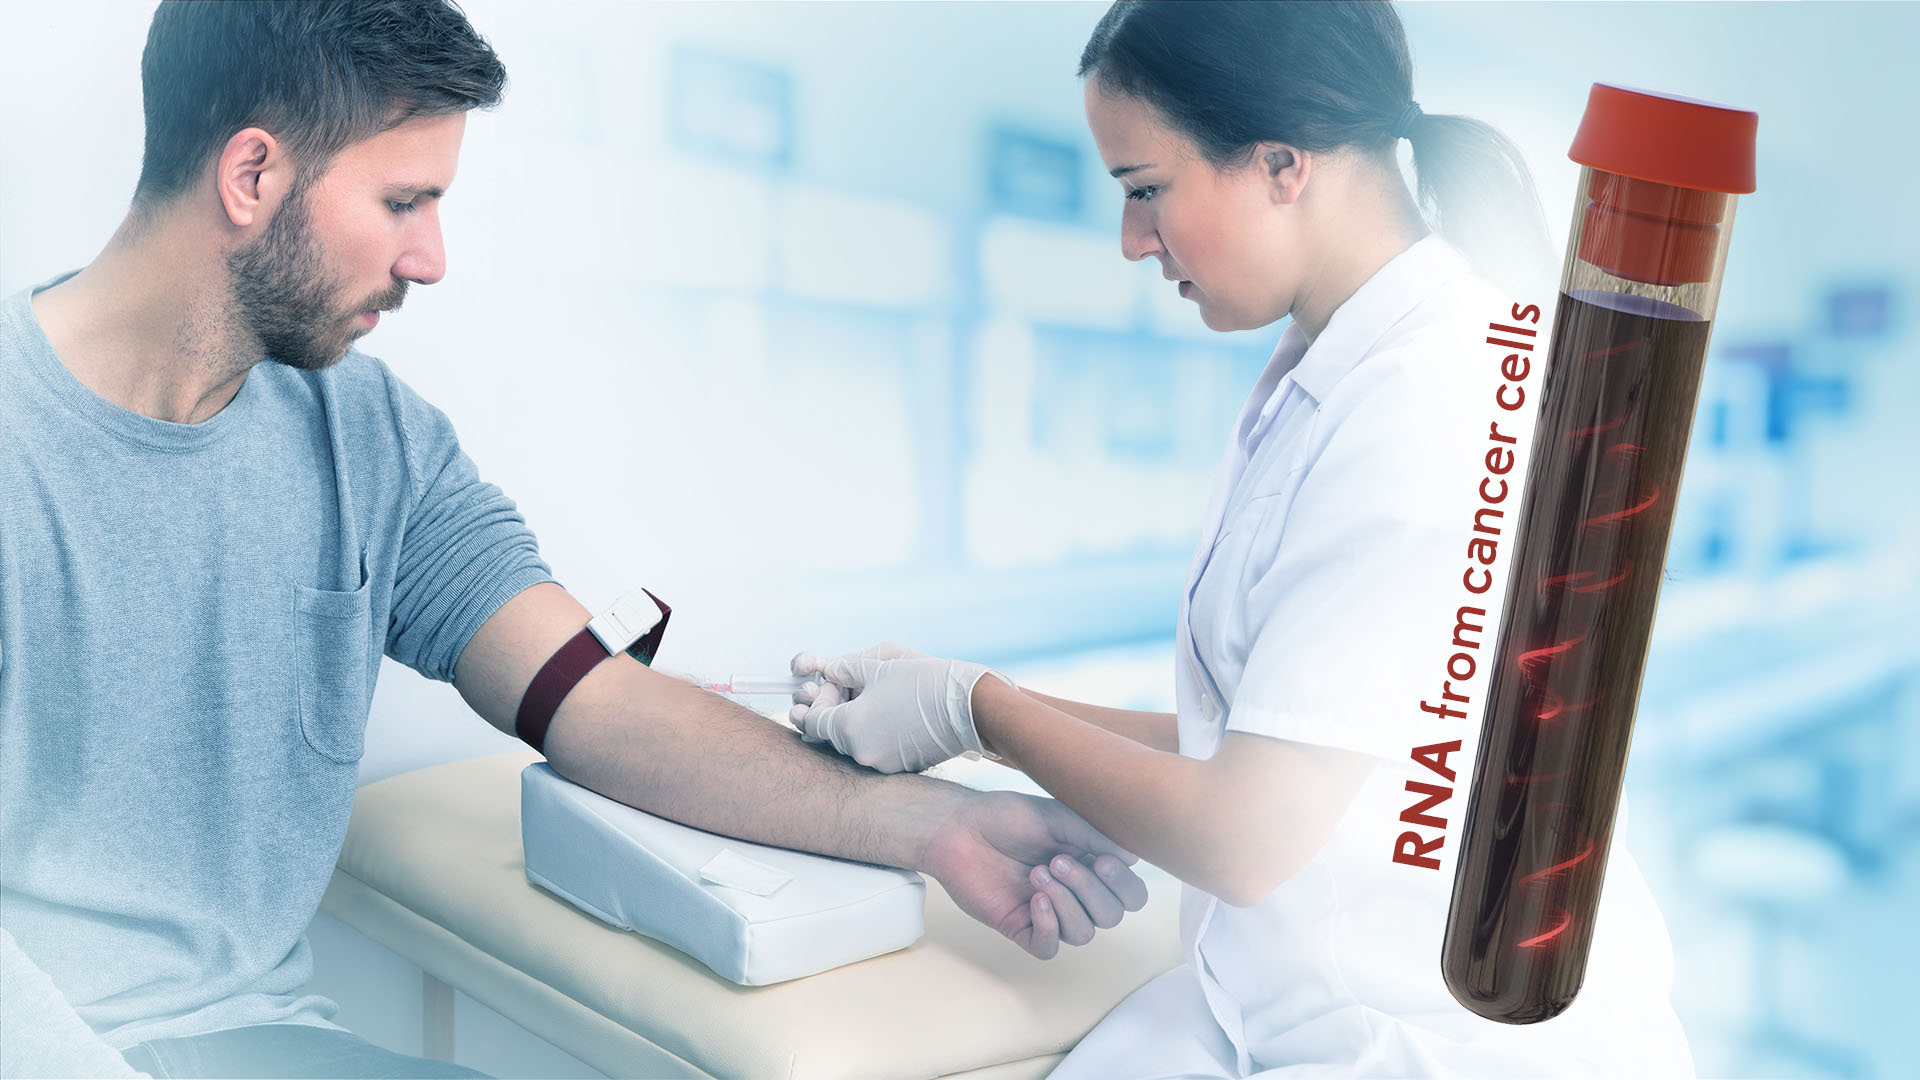 A nurse draws blood from the arm of a patient. To the side, RNA floats inside a vial of blood. The vial is labeled RNA from cancer cells.